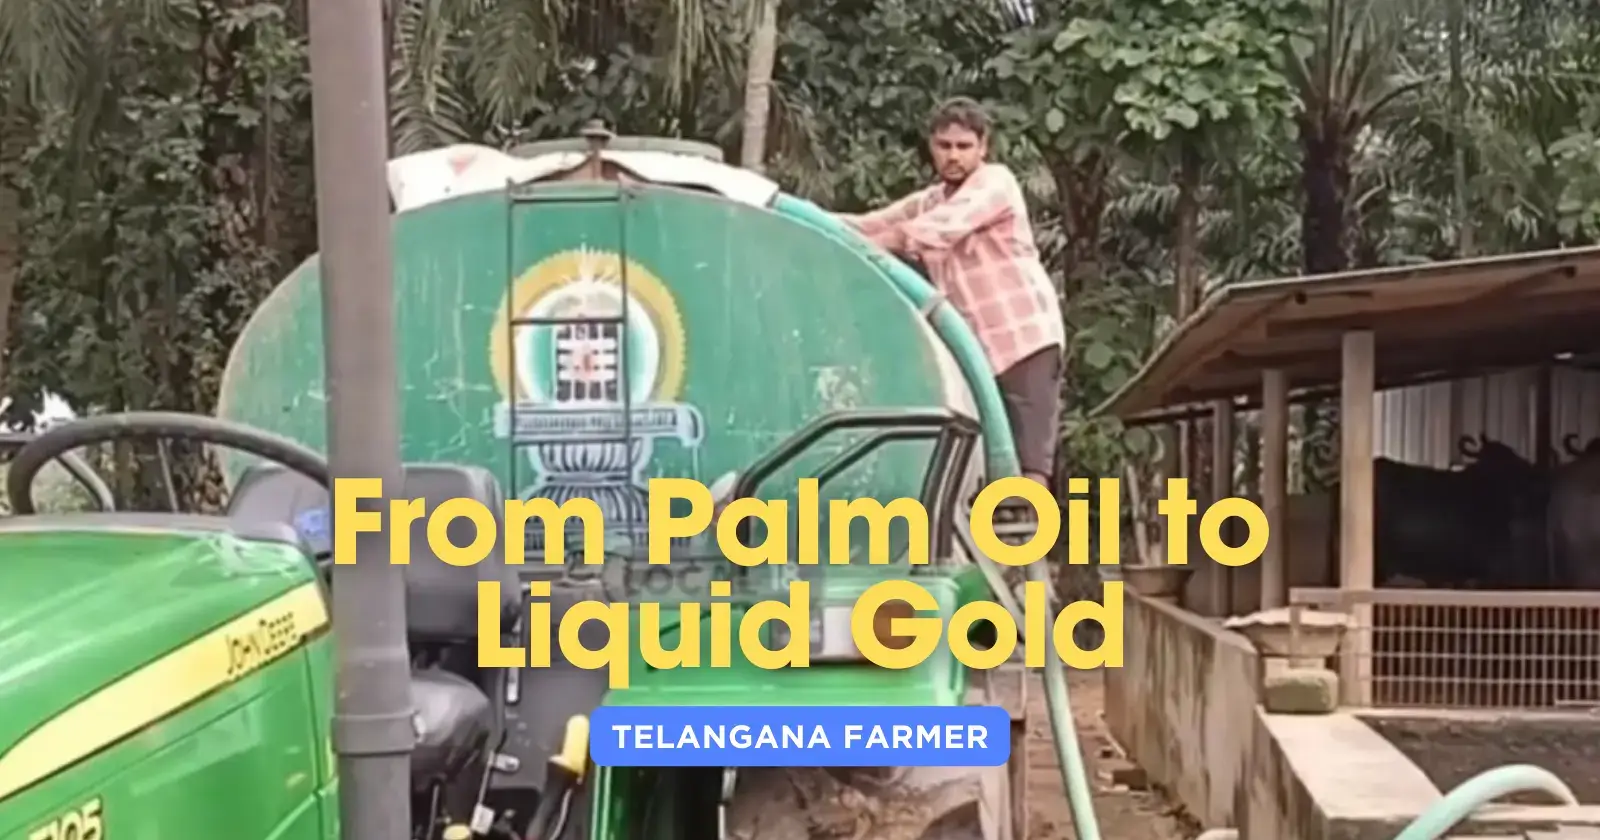 from-palm-oil-to-liquid-gold-telangana-farmer-s-cow-based-fertilizer-reaps-rich-rewards